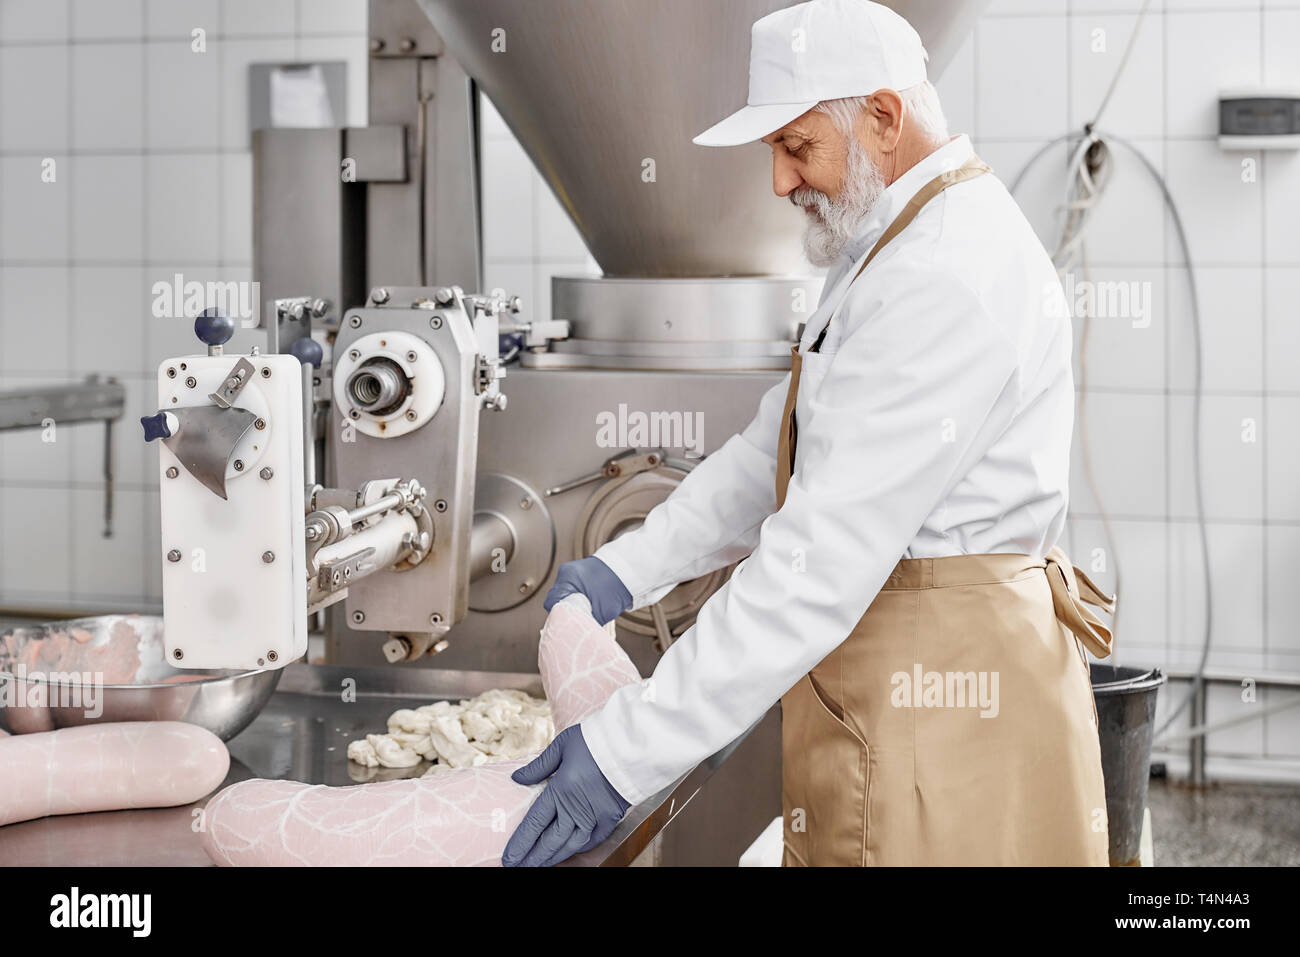 Butcher man working with production of sausages, standing near equipment, holding sausage. Worker wearing in white uniform, brown apron, rubber gloves. Food industry. Stock Photo